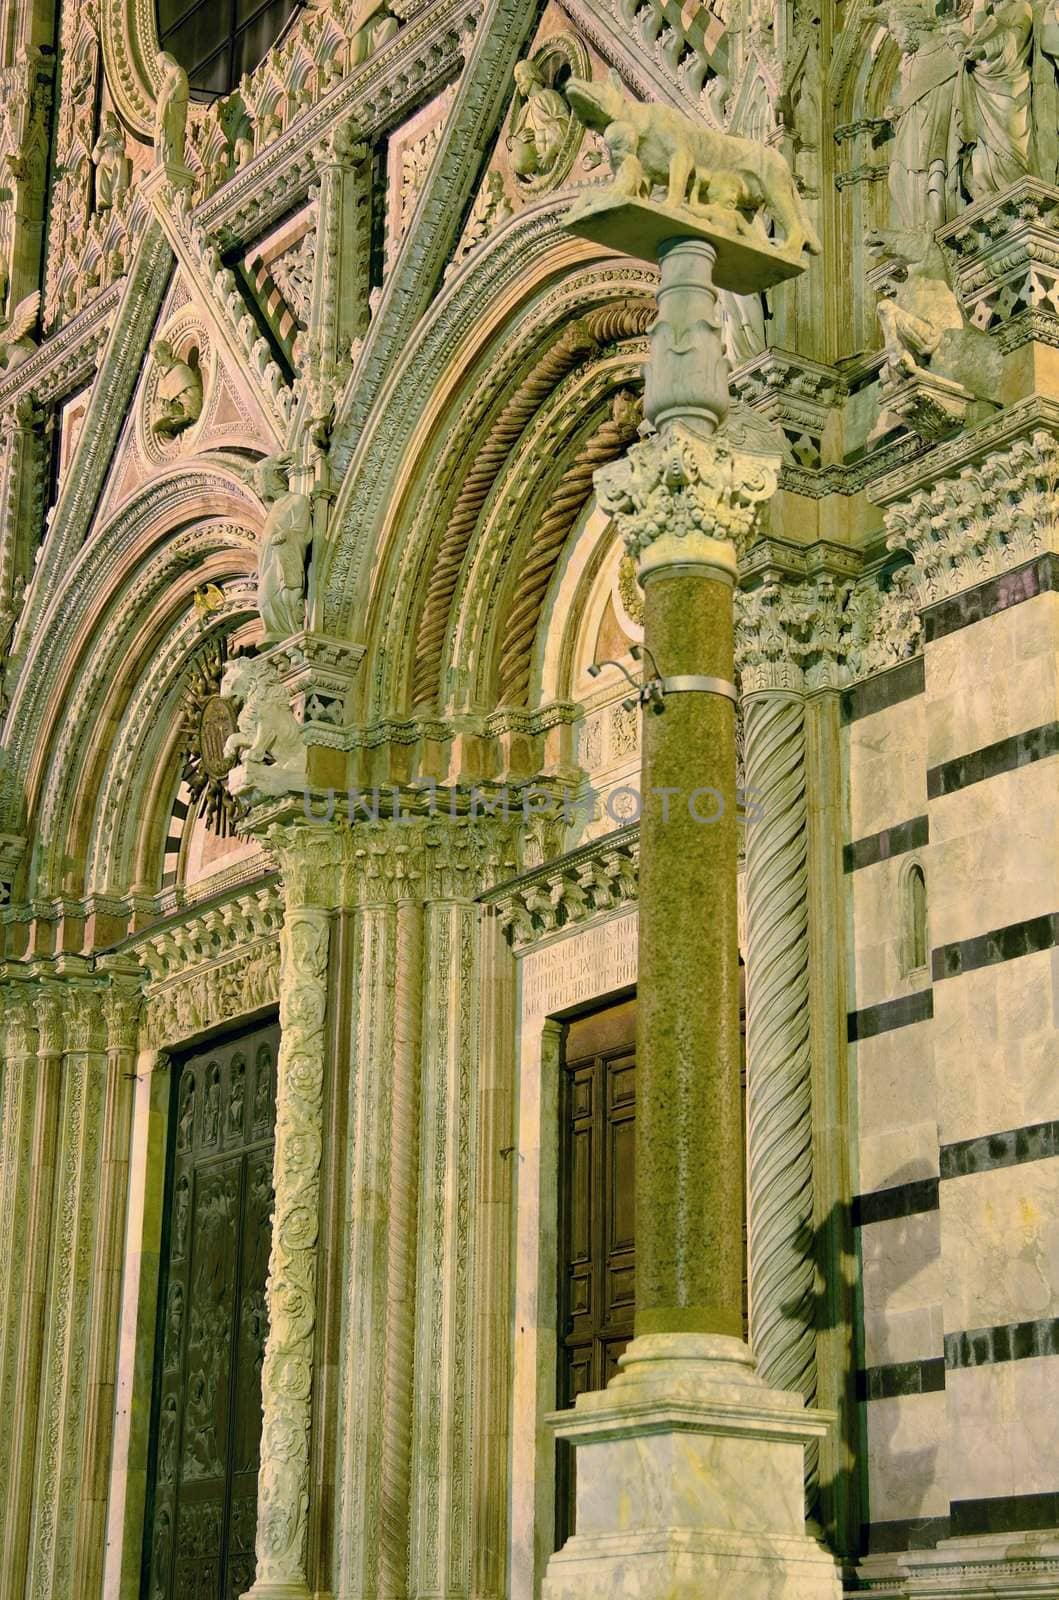 Details of the facade of the Cathedral of Siena (Italy)